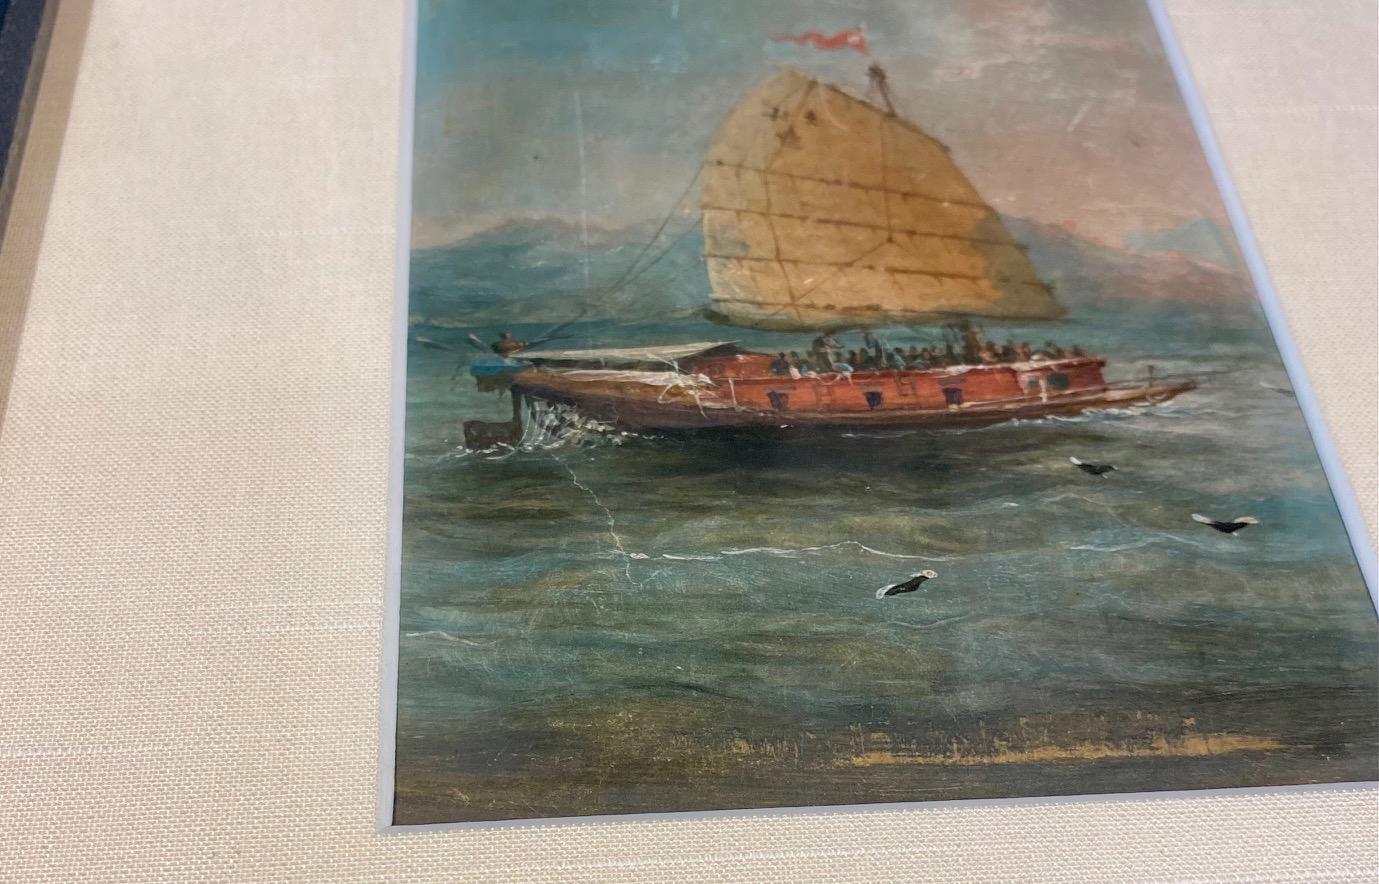 19th century China trade seascape with a Junk, one of three Export paintings, circa 1830s, a small finely detailed oil on panel seascape with junk under sail, red pennant flying from mast, calligraphy on lateen sail, crew visible on deck, seabirds